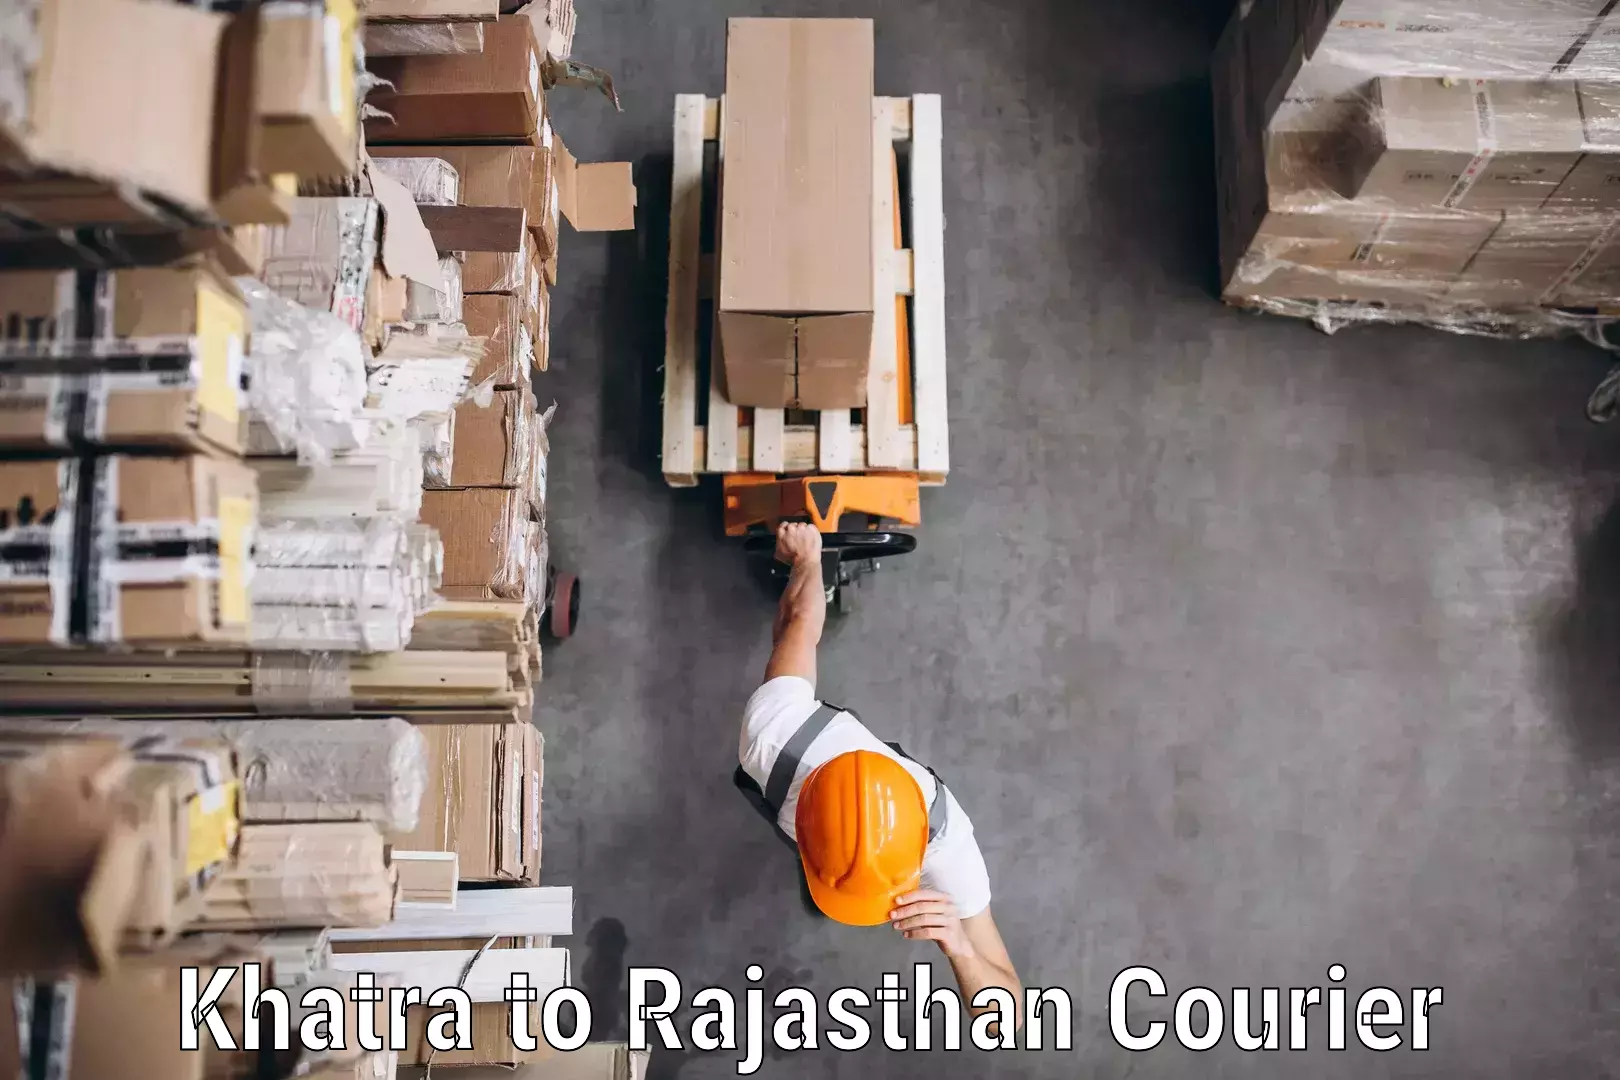 Rapid shipping services Khatra to Nohar